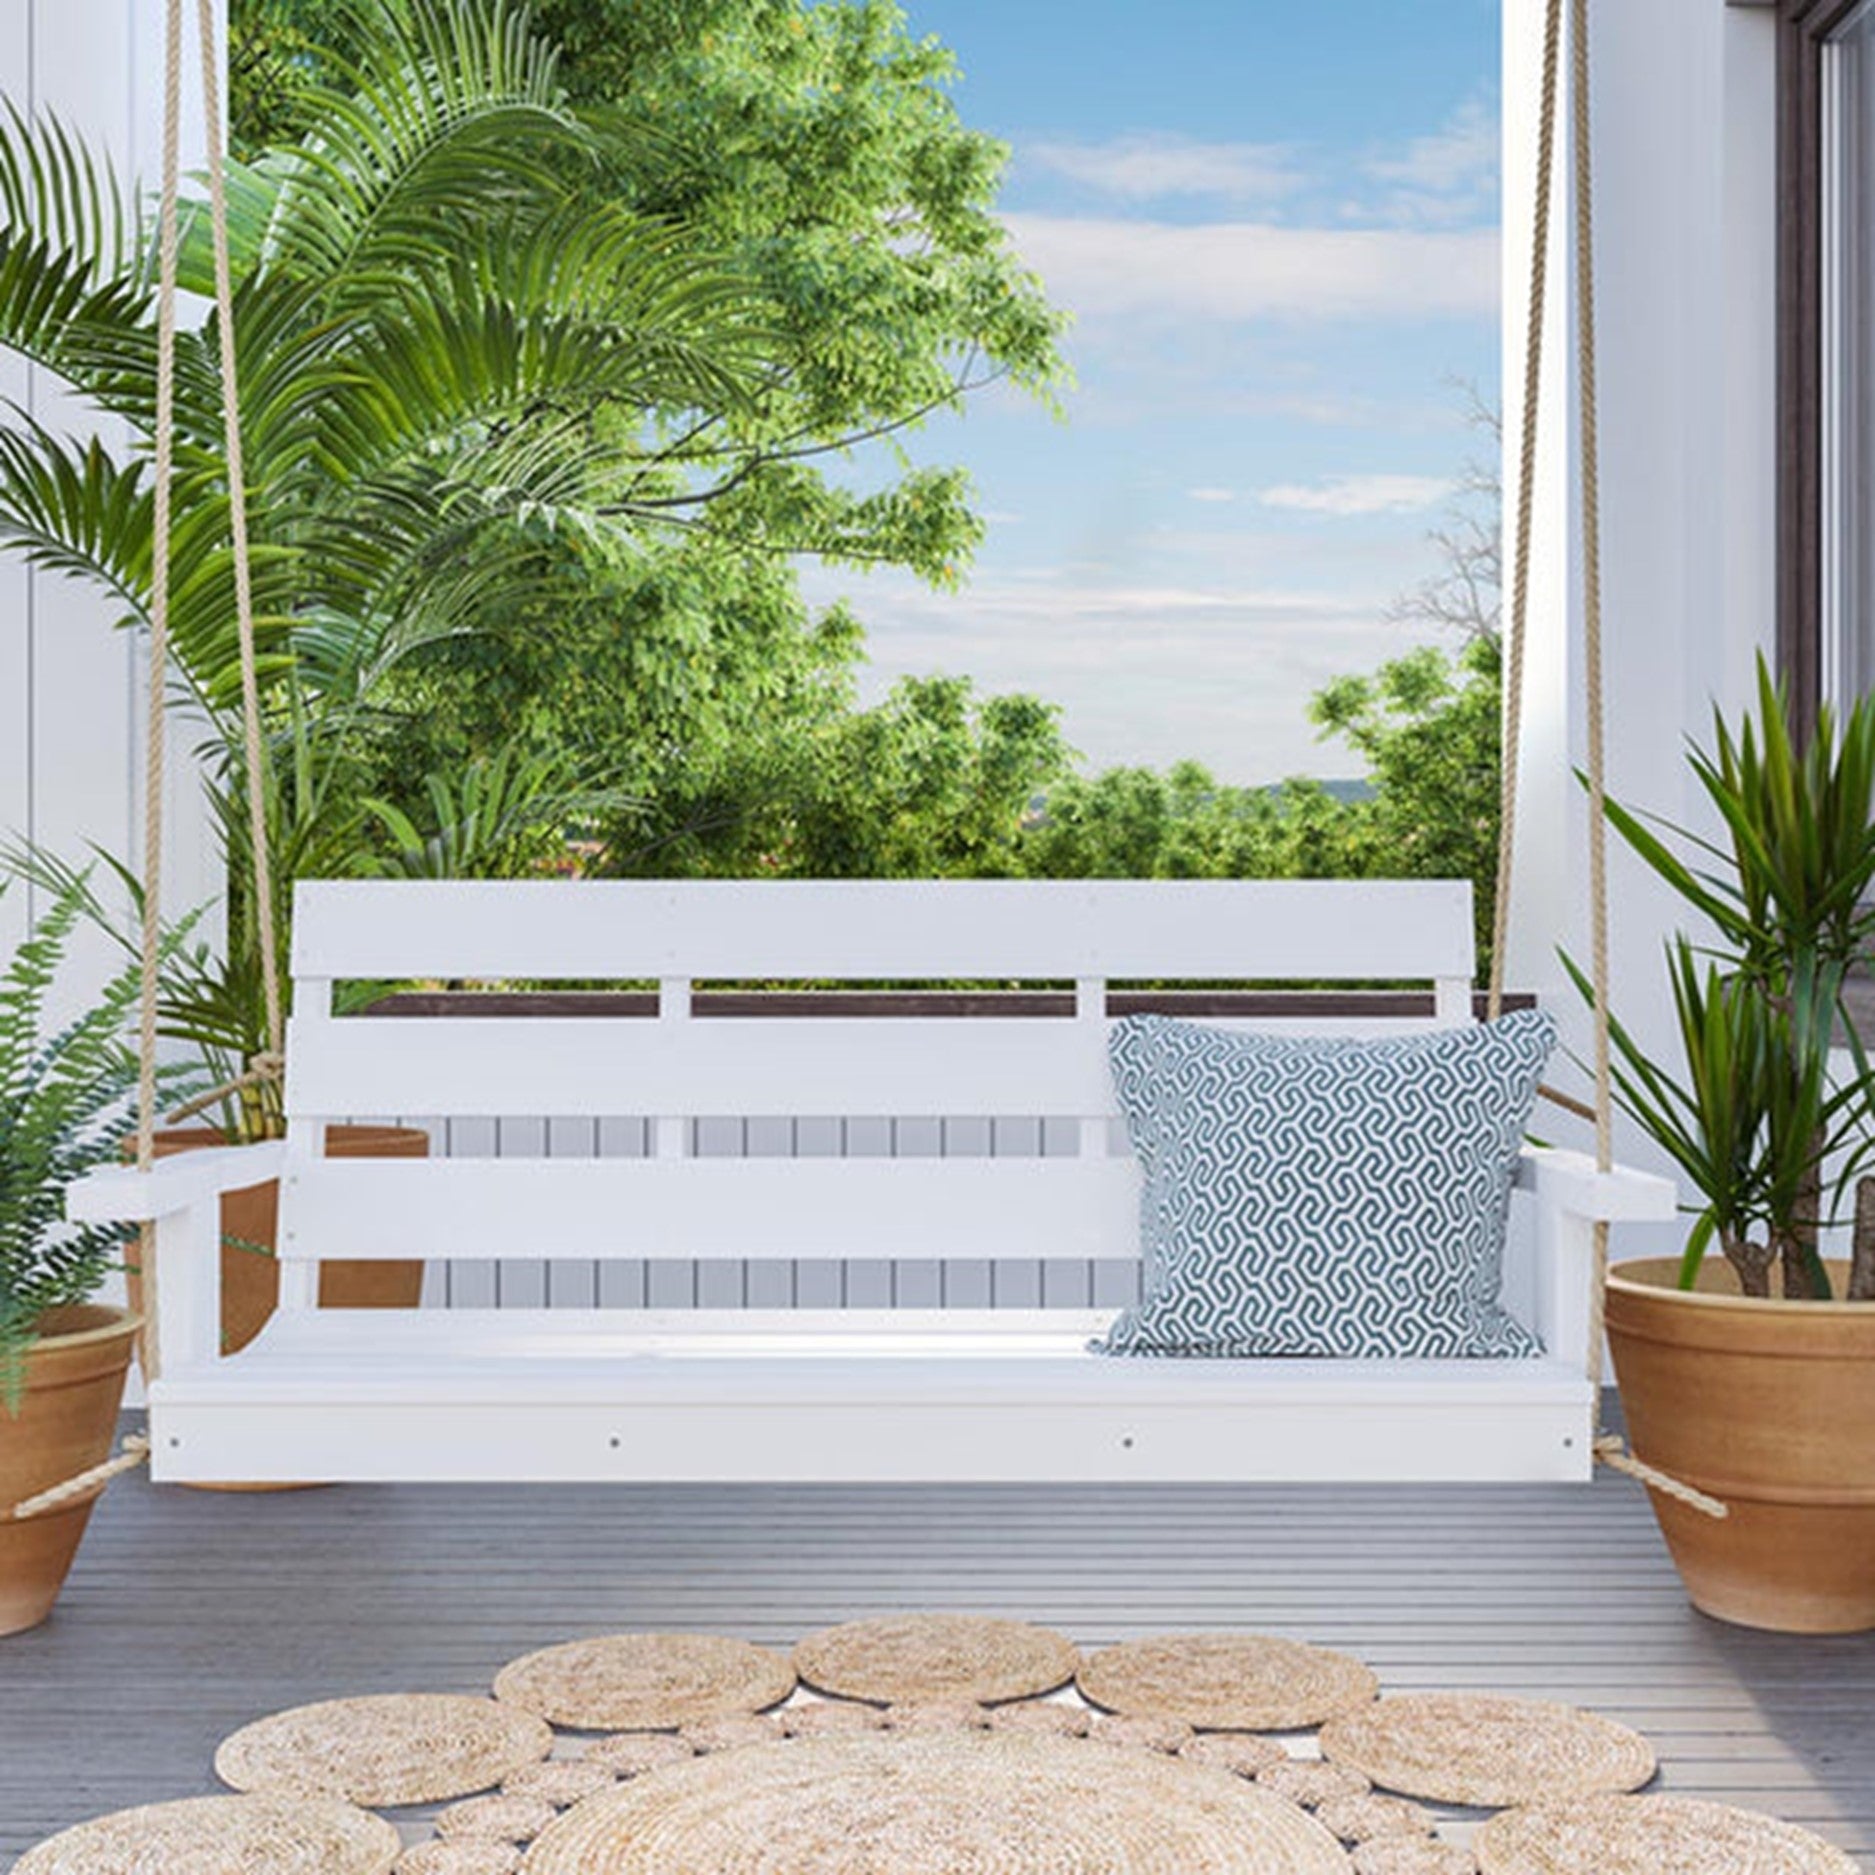 Latest Release - The Moderne Porch Swing by Porchgate